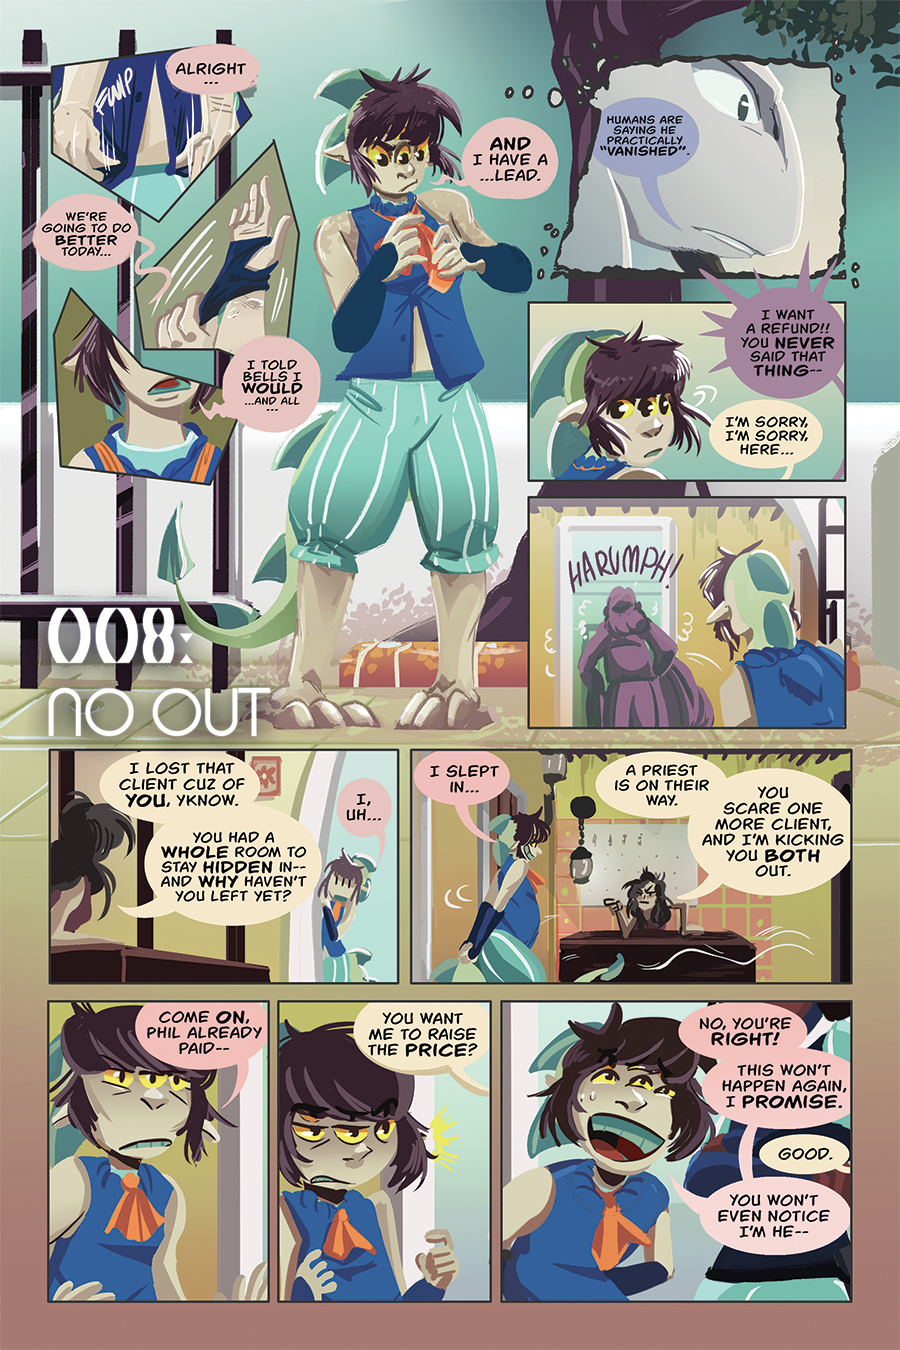 Chapter 8, page 3